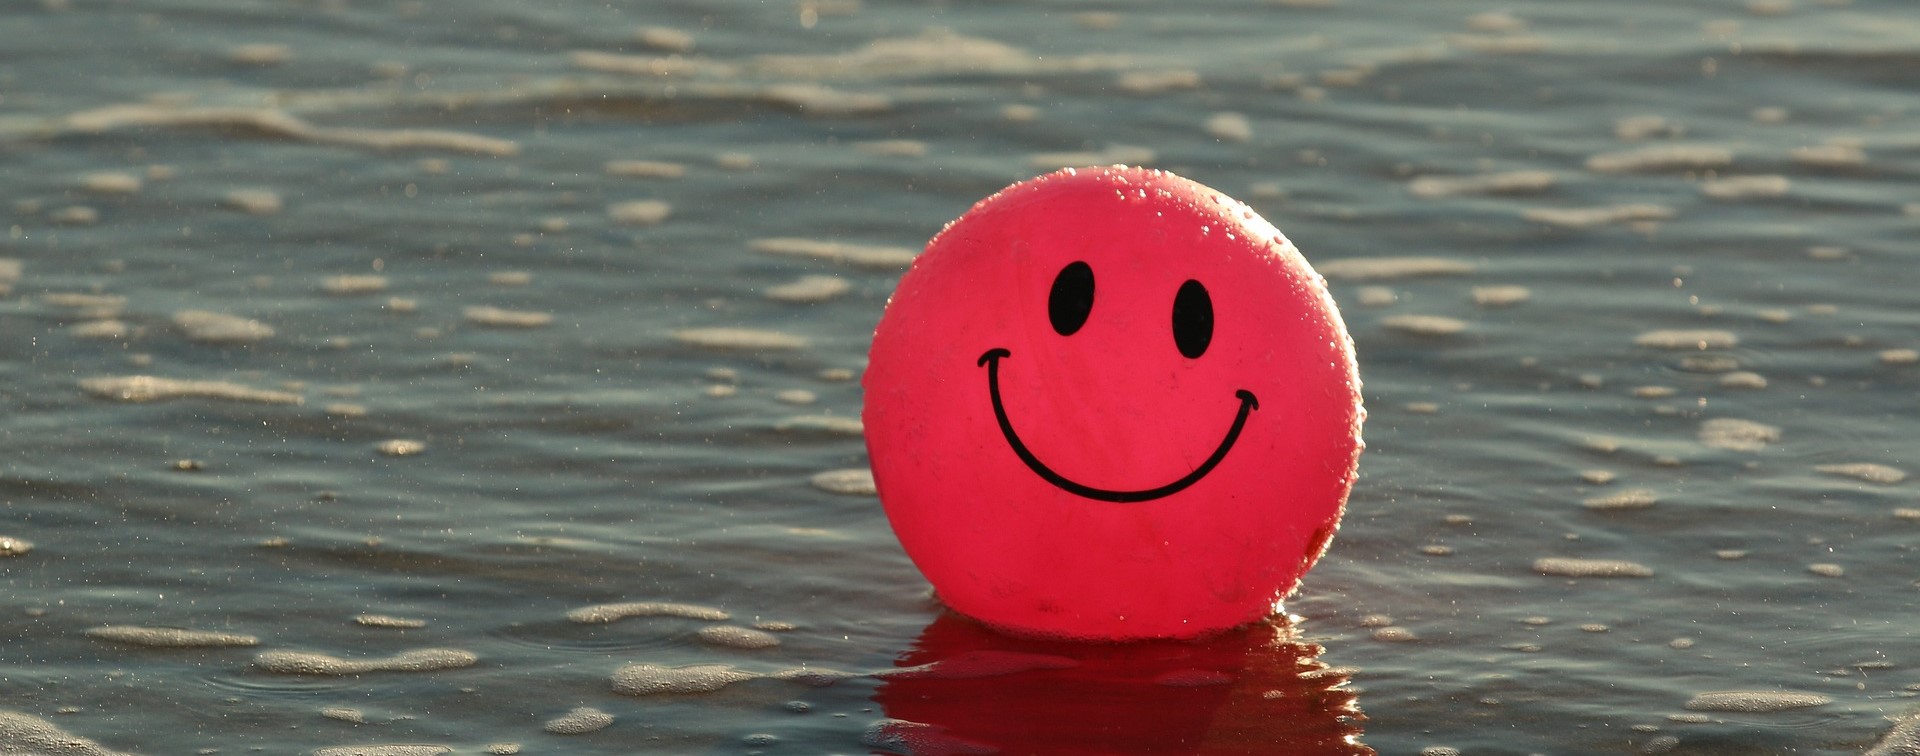 Happy Face Beach Ball on water